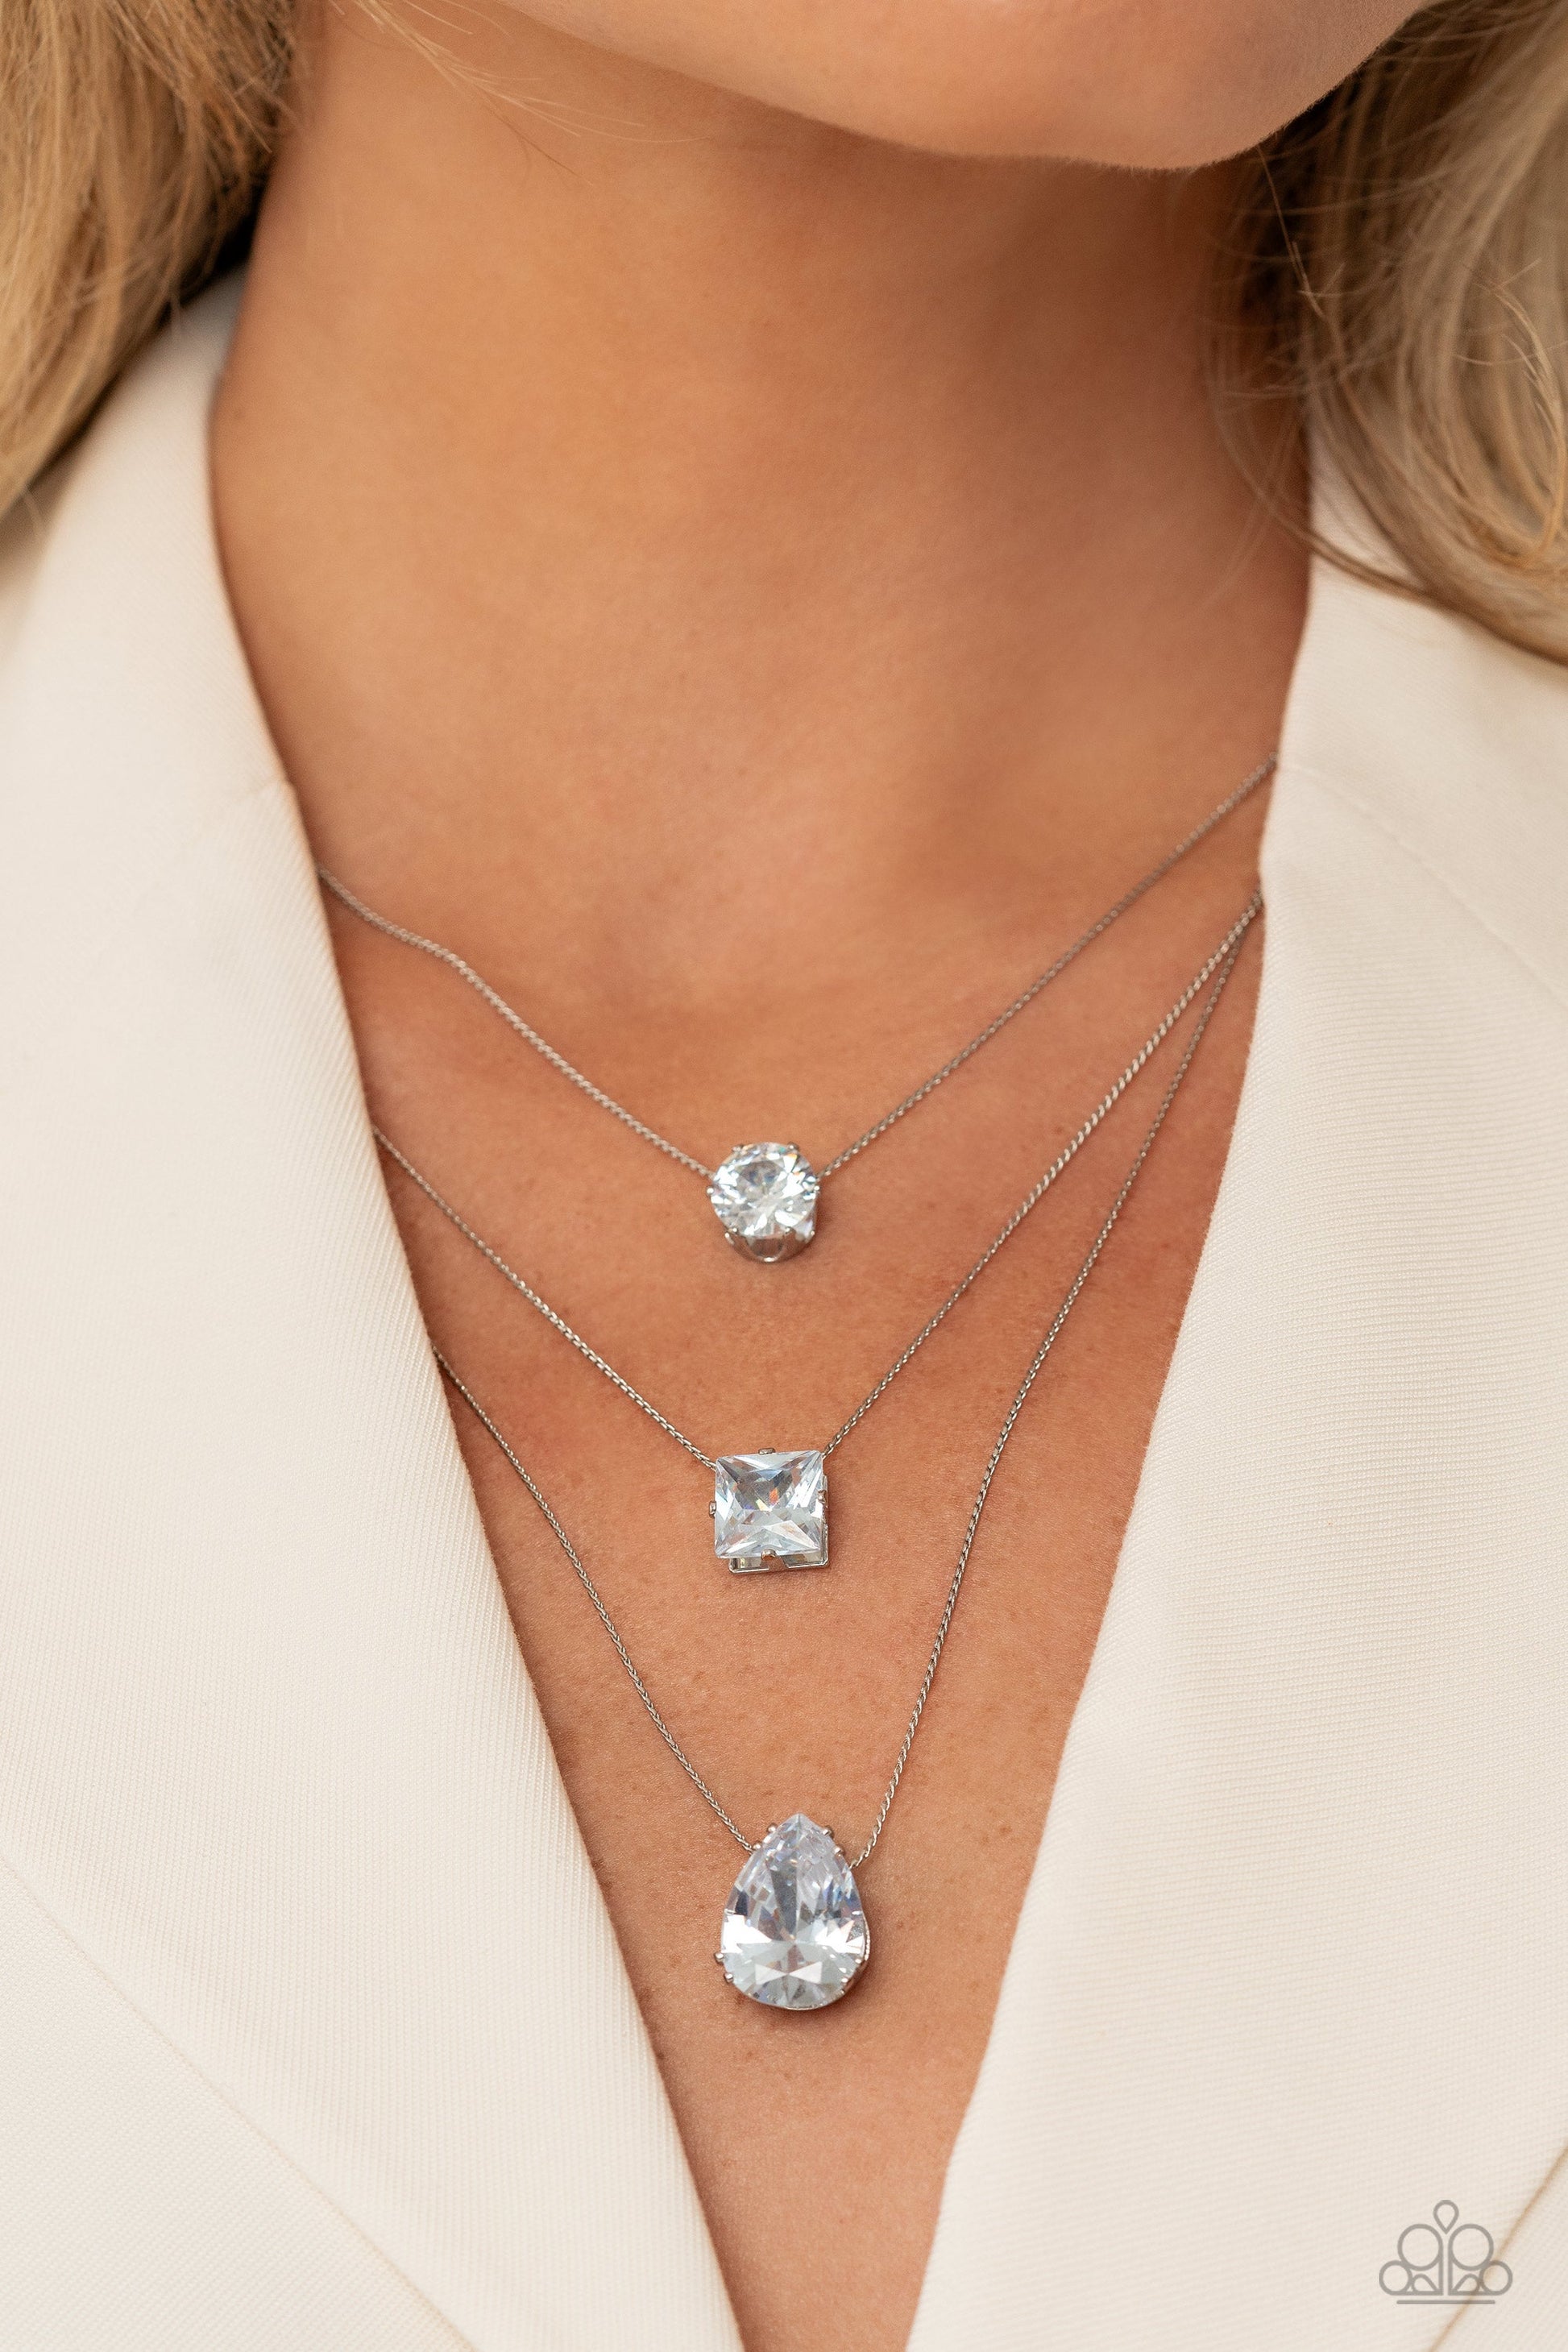 Lustrous Layers - White and Silver Necklace - Paparazzi Accessories - Featuring a subtle iridescent finish, exaggerated, faceted round, square, and teardrop gems layer down the chest from three sleek silver dainty chains, in a refined fashion.